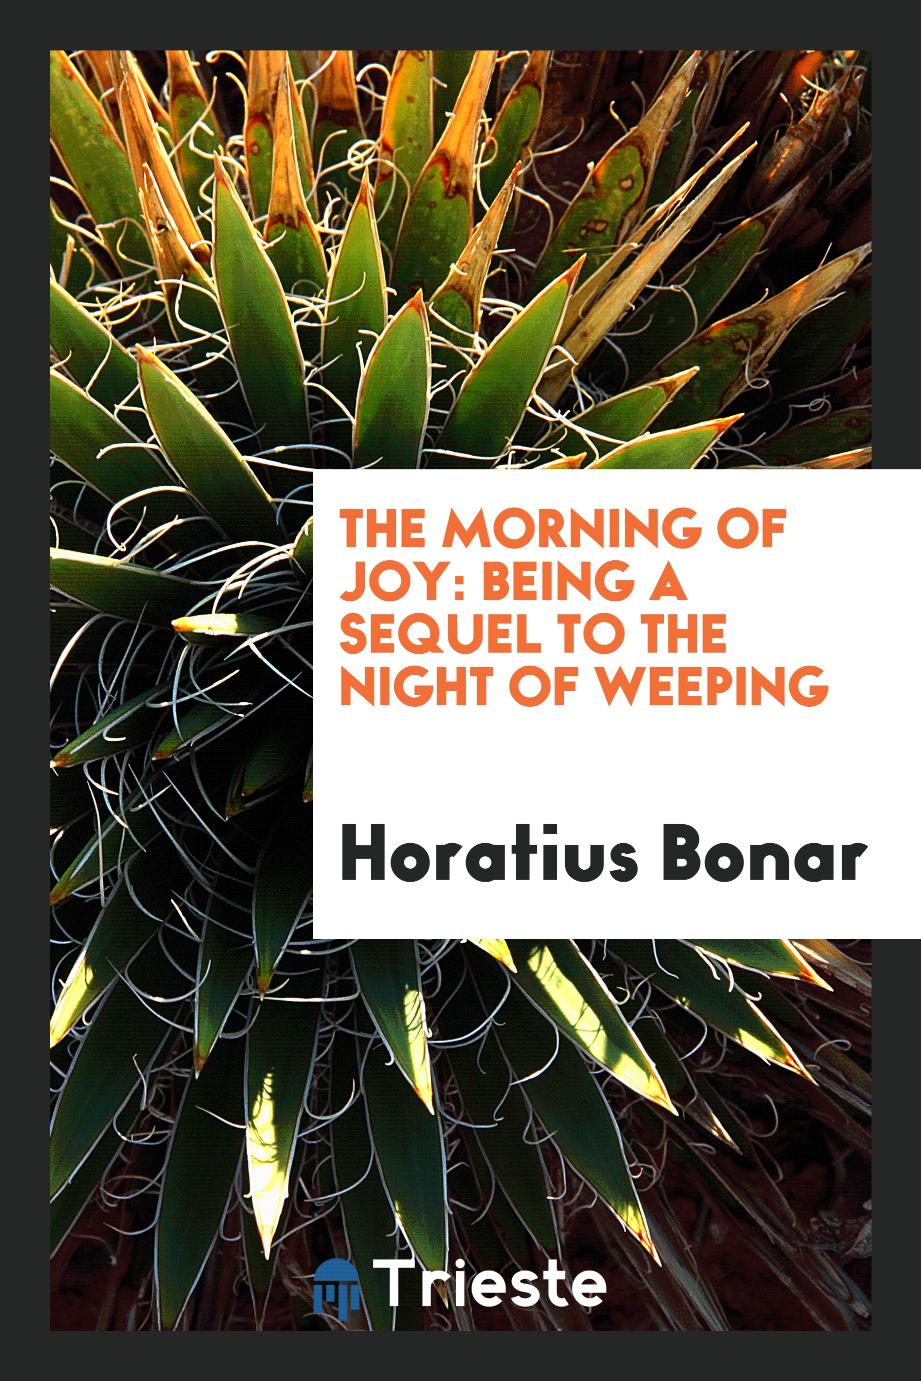 The Morning of Joy: Being a Sequel to the Night of Weeping